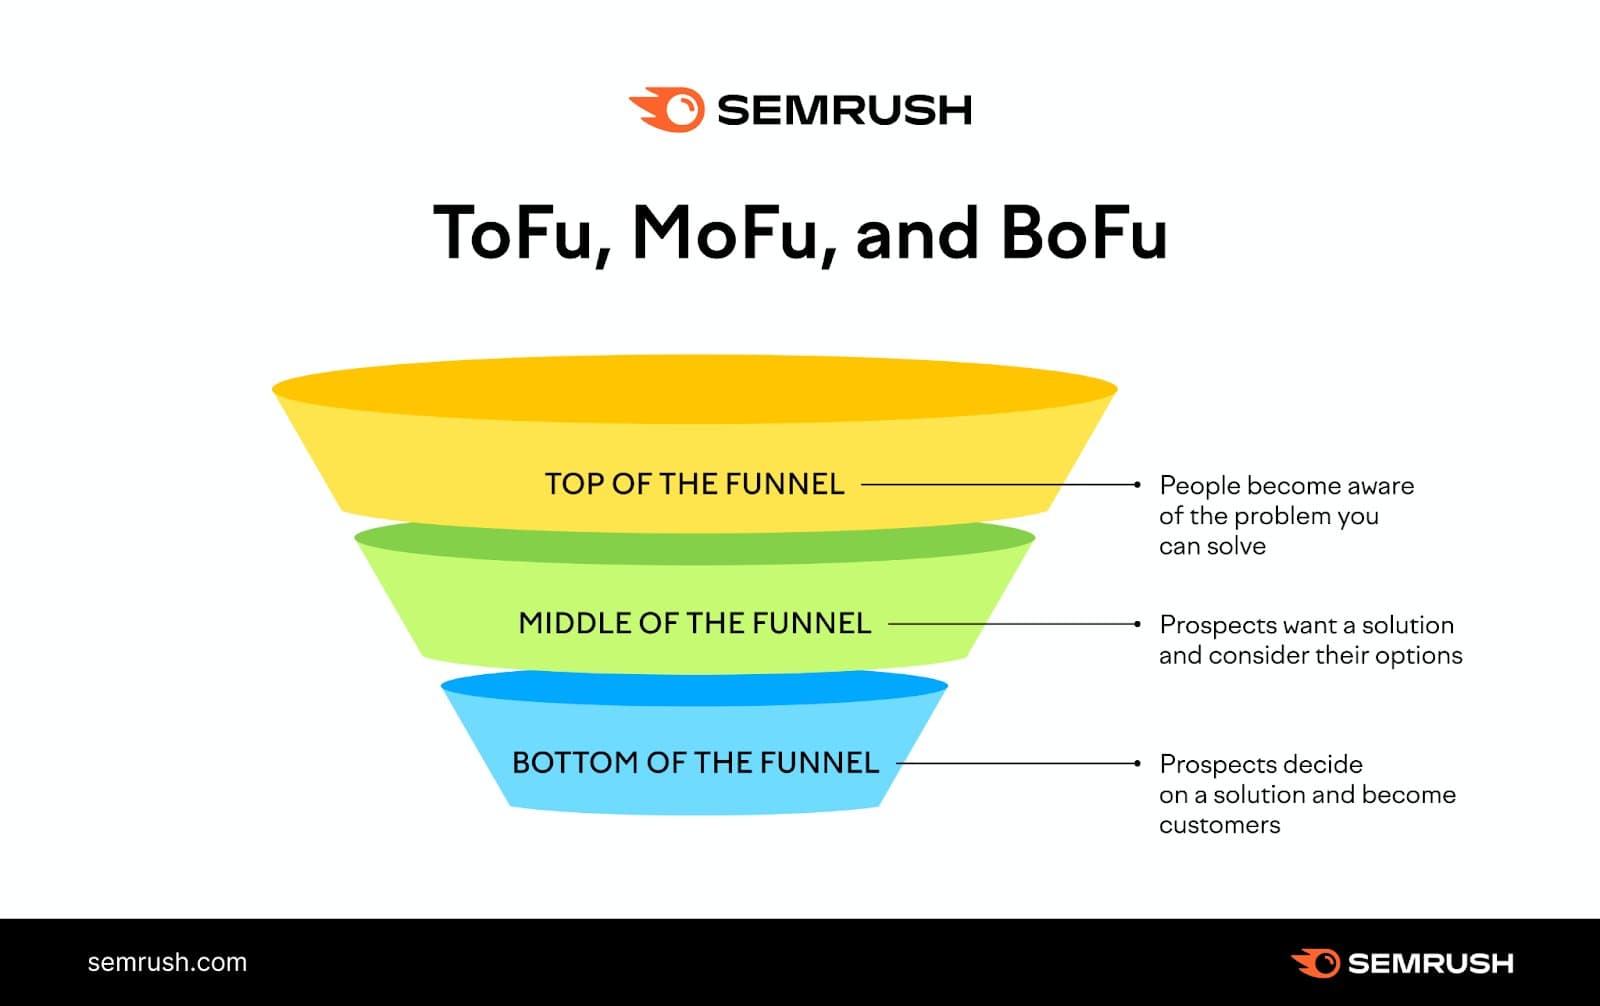 An image of marketing funnel, with "ToFu," "MoFu," and "BoFu" sections